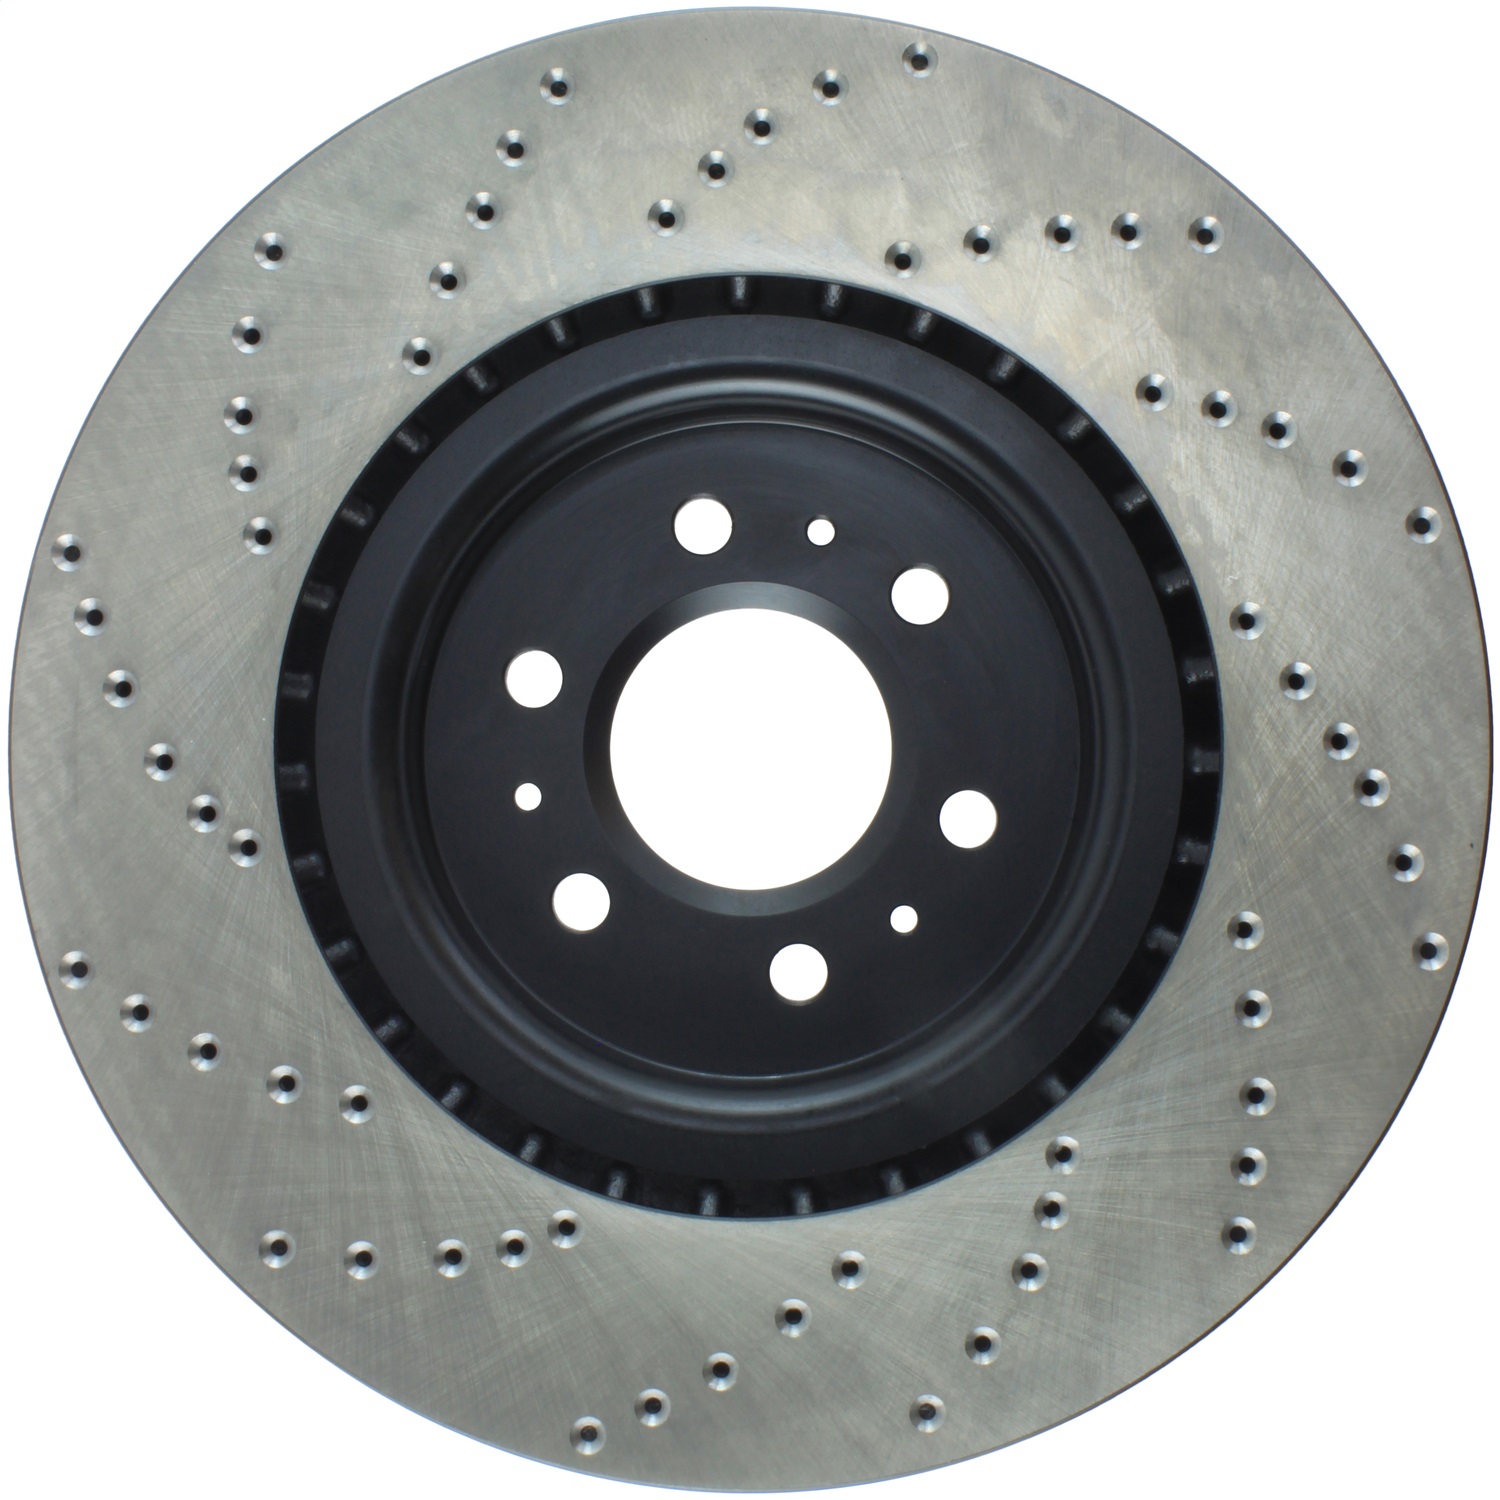 StopTech 128.62075L Sport Cross-Drilled Disc Brake Rotor Fits 04-11 CTS STS